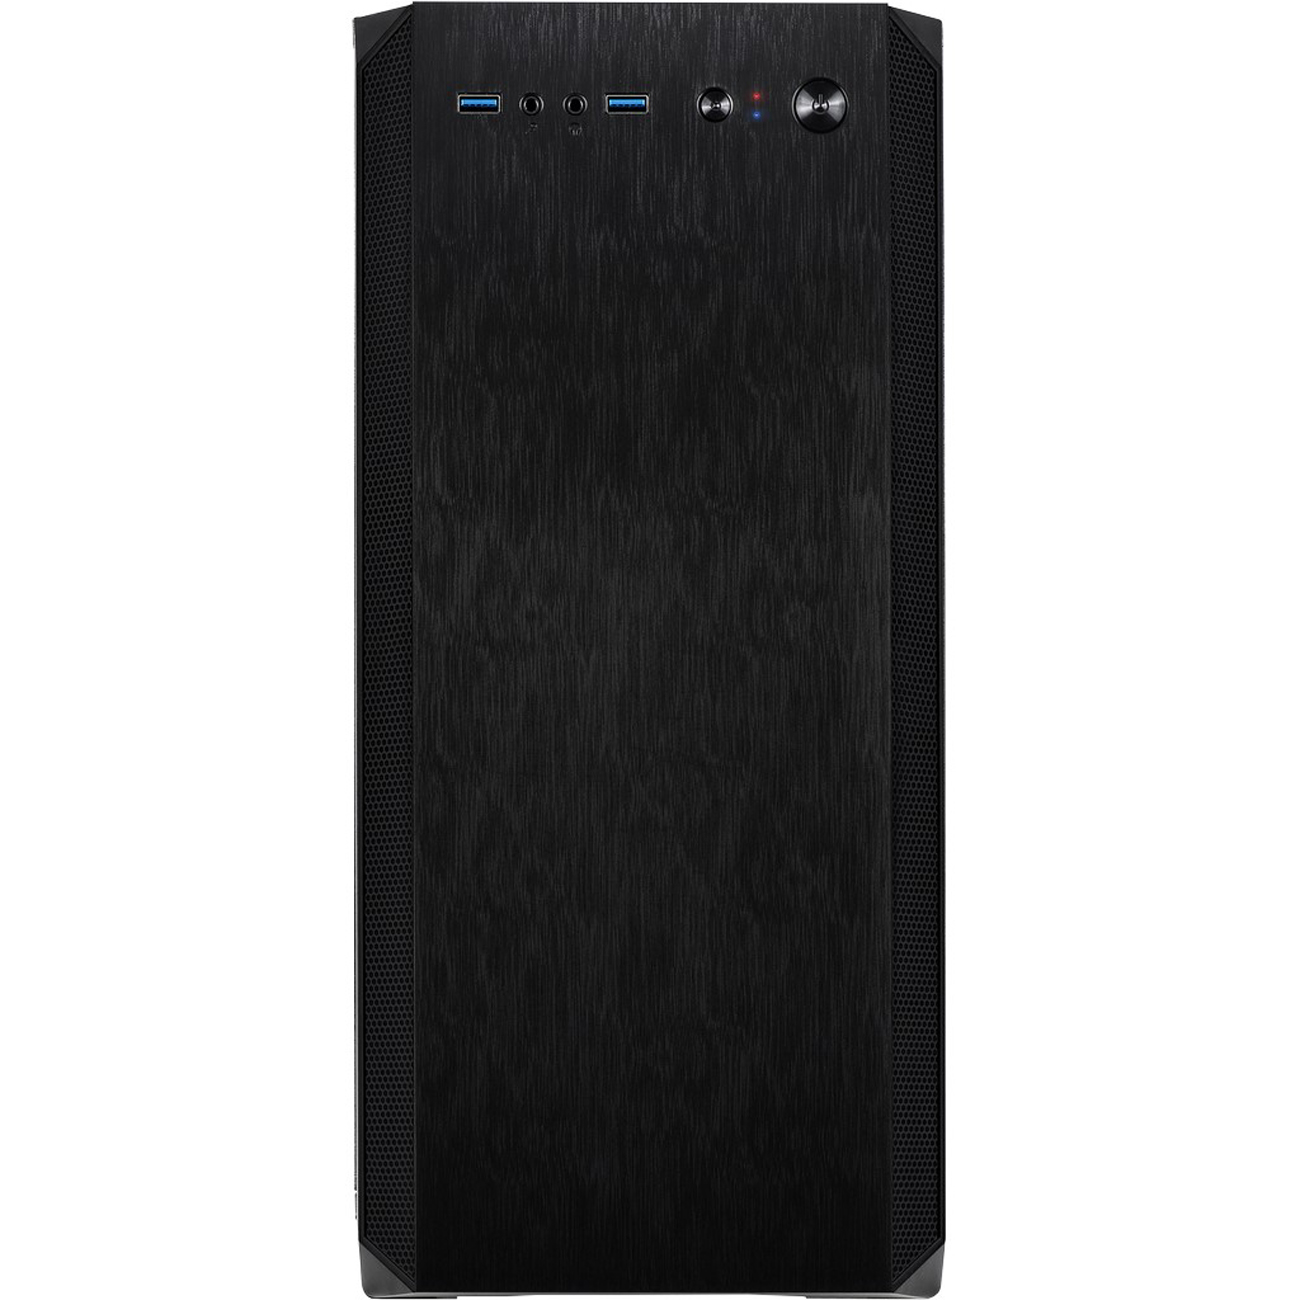 LE SYSTEMS Home i3 silent B